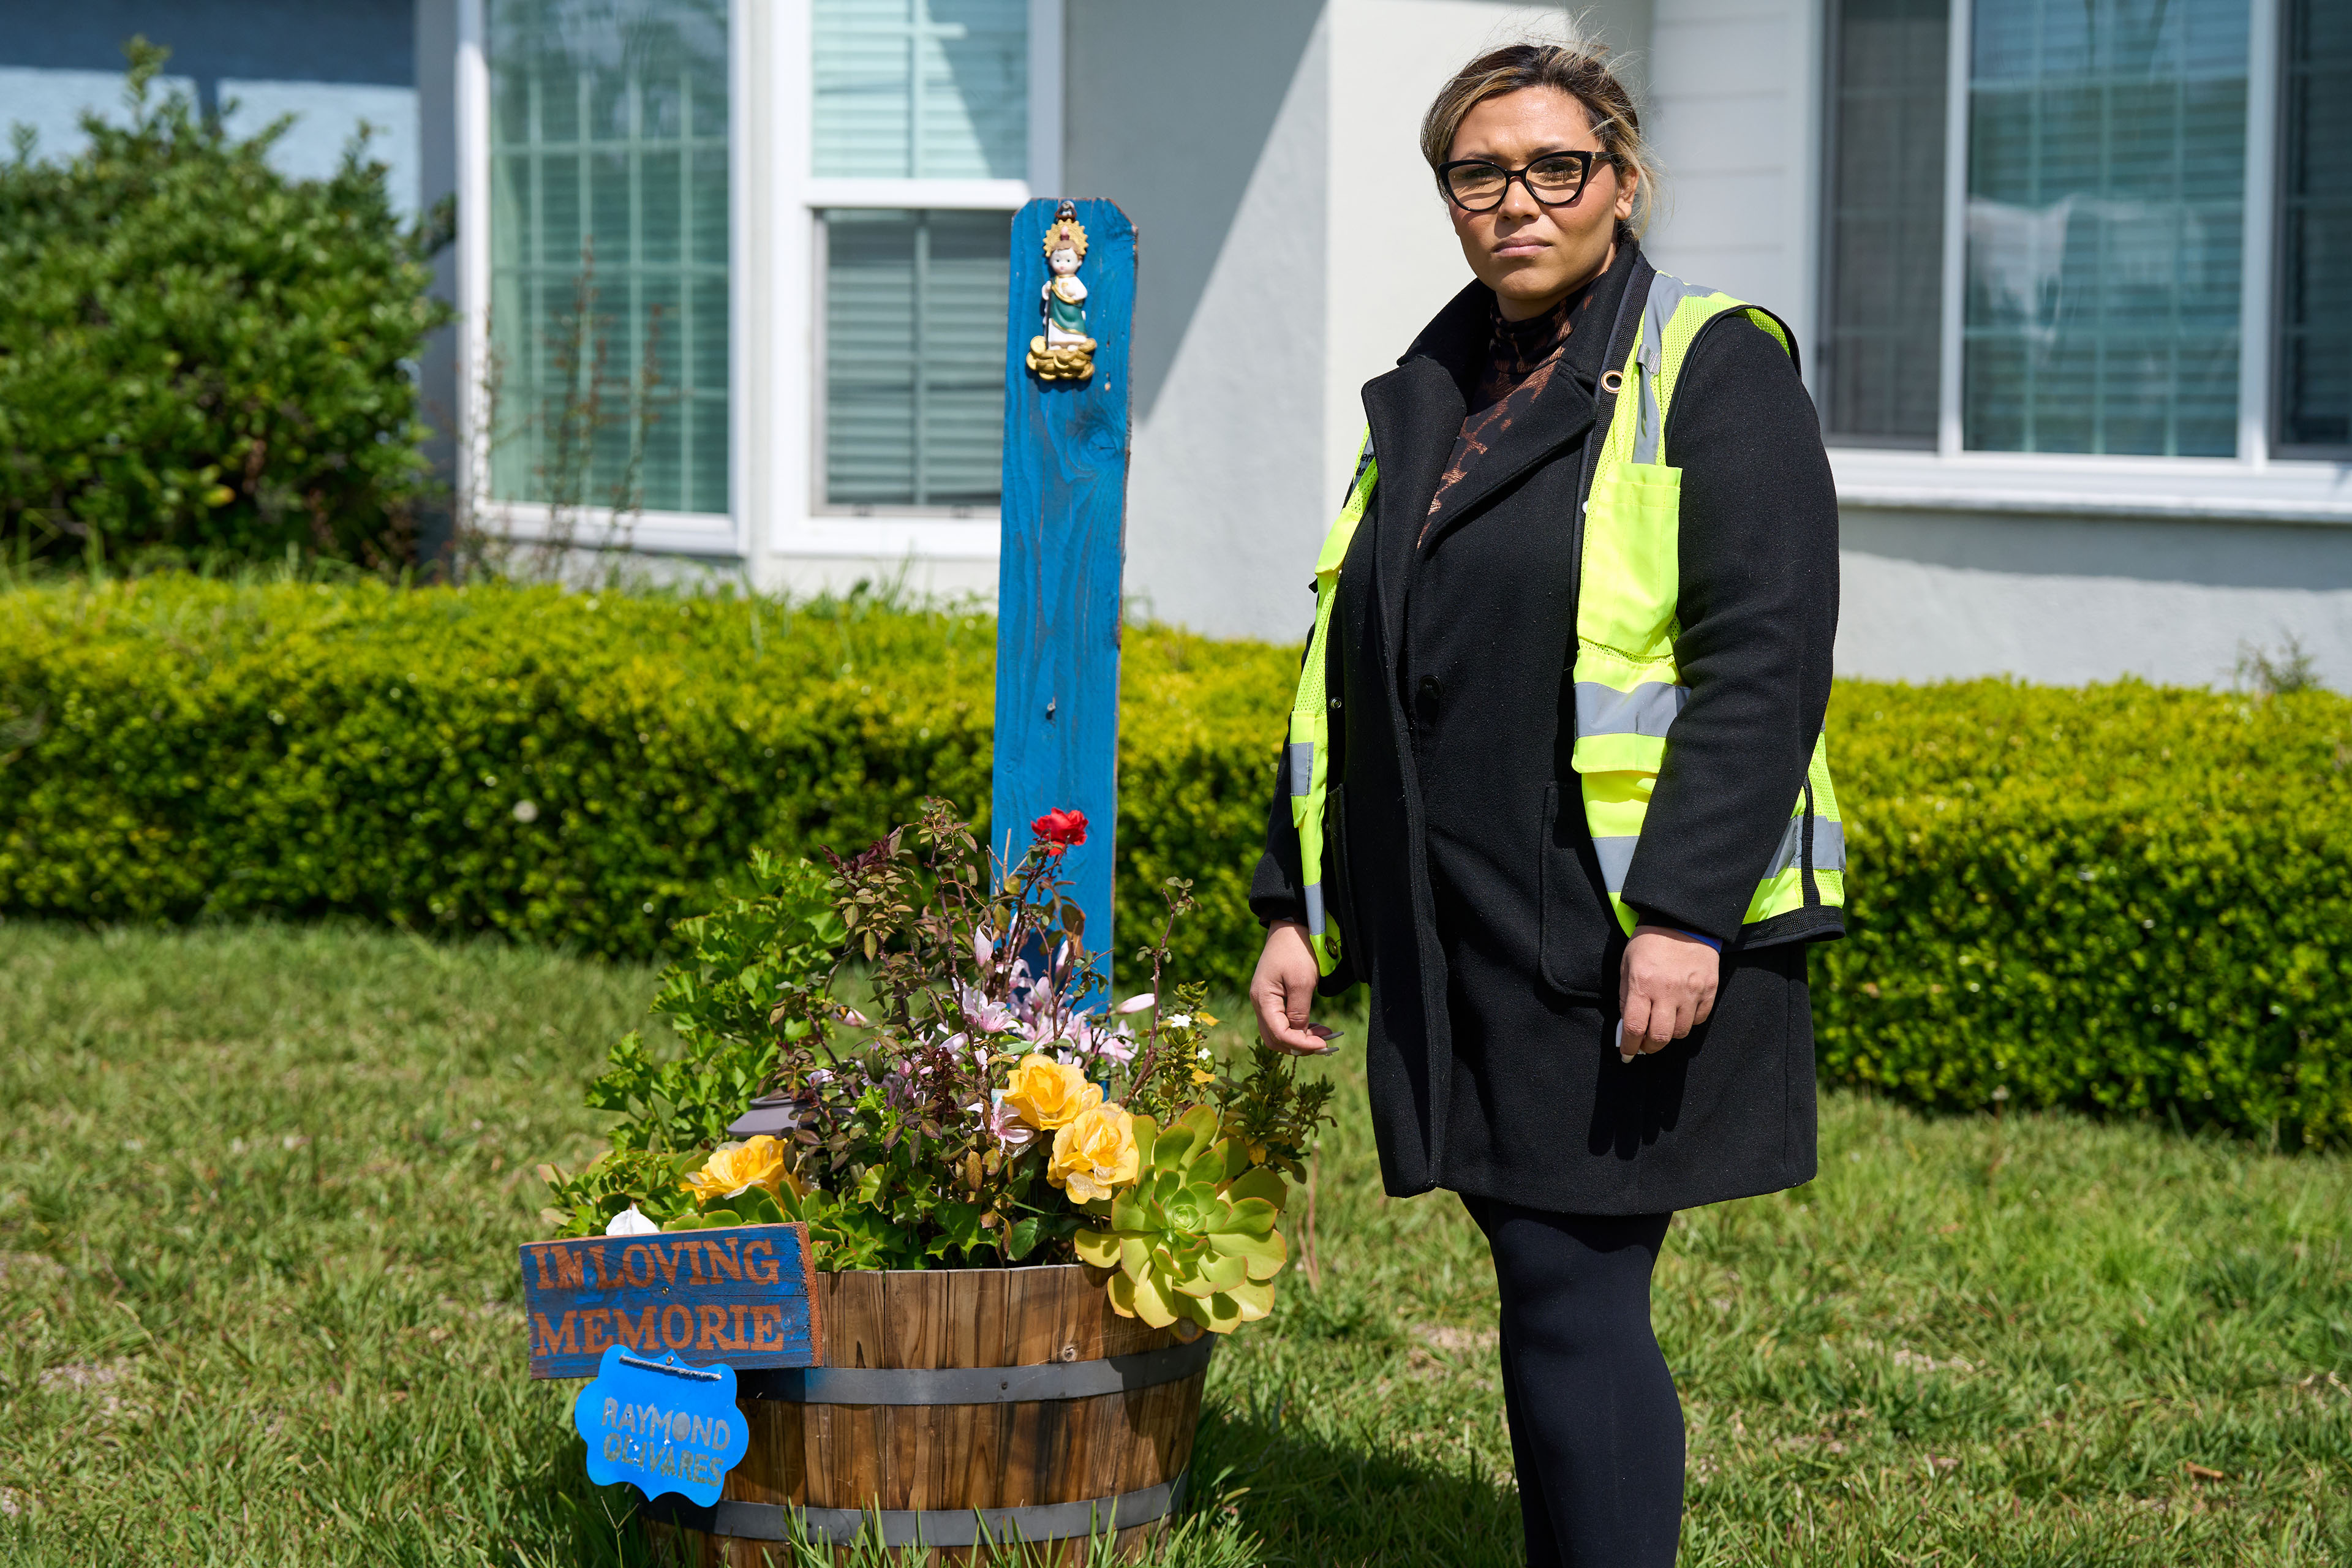 Cindi Enamorad, Olivares' sister, stands beside a memorial for her brother outside his Los Angeles home. There are flowers in a pot and a blue painted sign that says, "in loving memorie / Raymond Olivares." Enamorad is wearing a traffic safety vest.